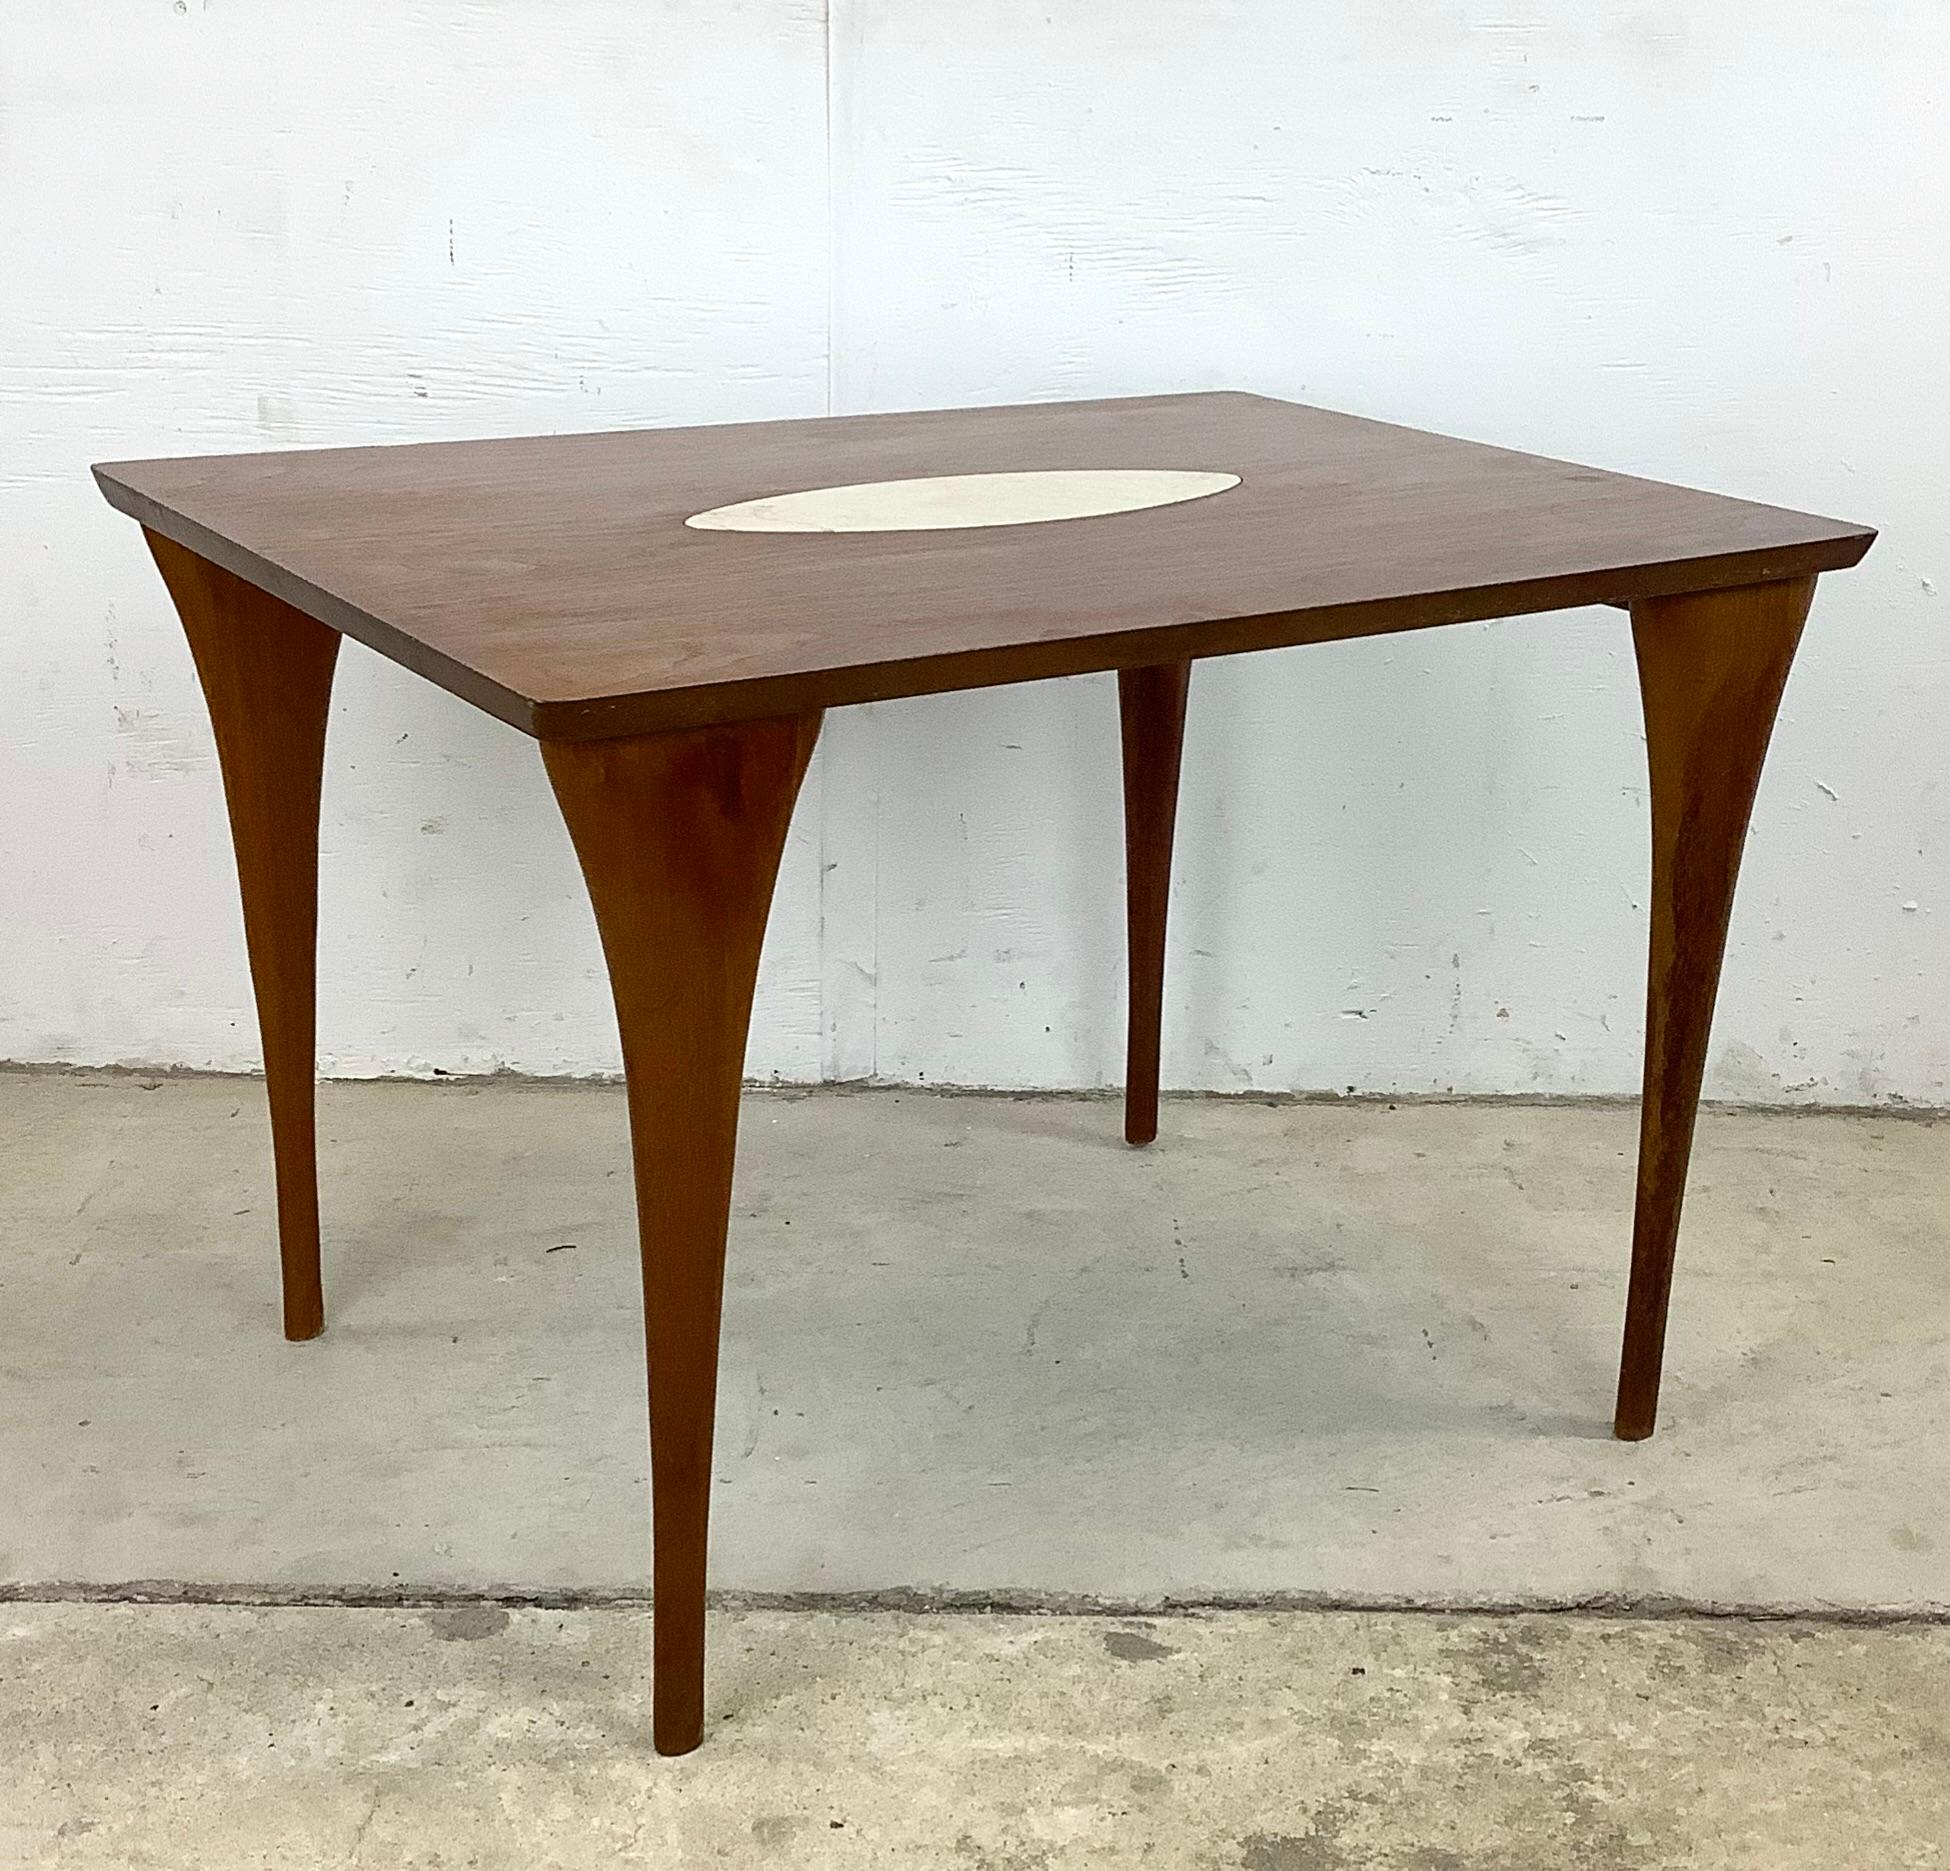 This striking Mid-Century Modern side table was made in Italy and features a beautiful wood finish, sculptural tapered legs, and unique stone inlay- the simple yet elegant appeal of this mid-century end table make it the perfect piece of vintage